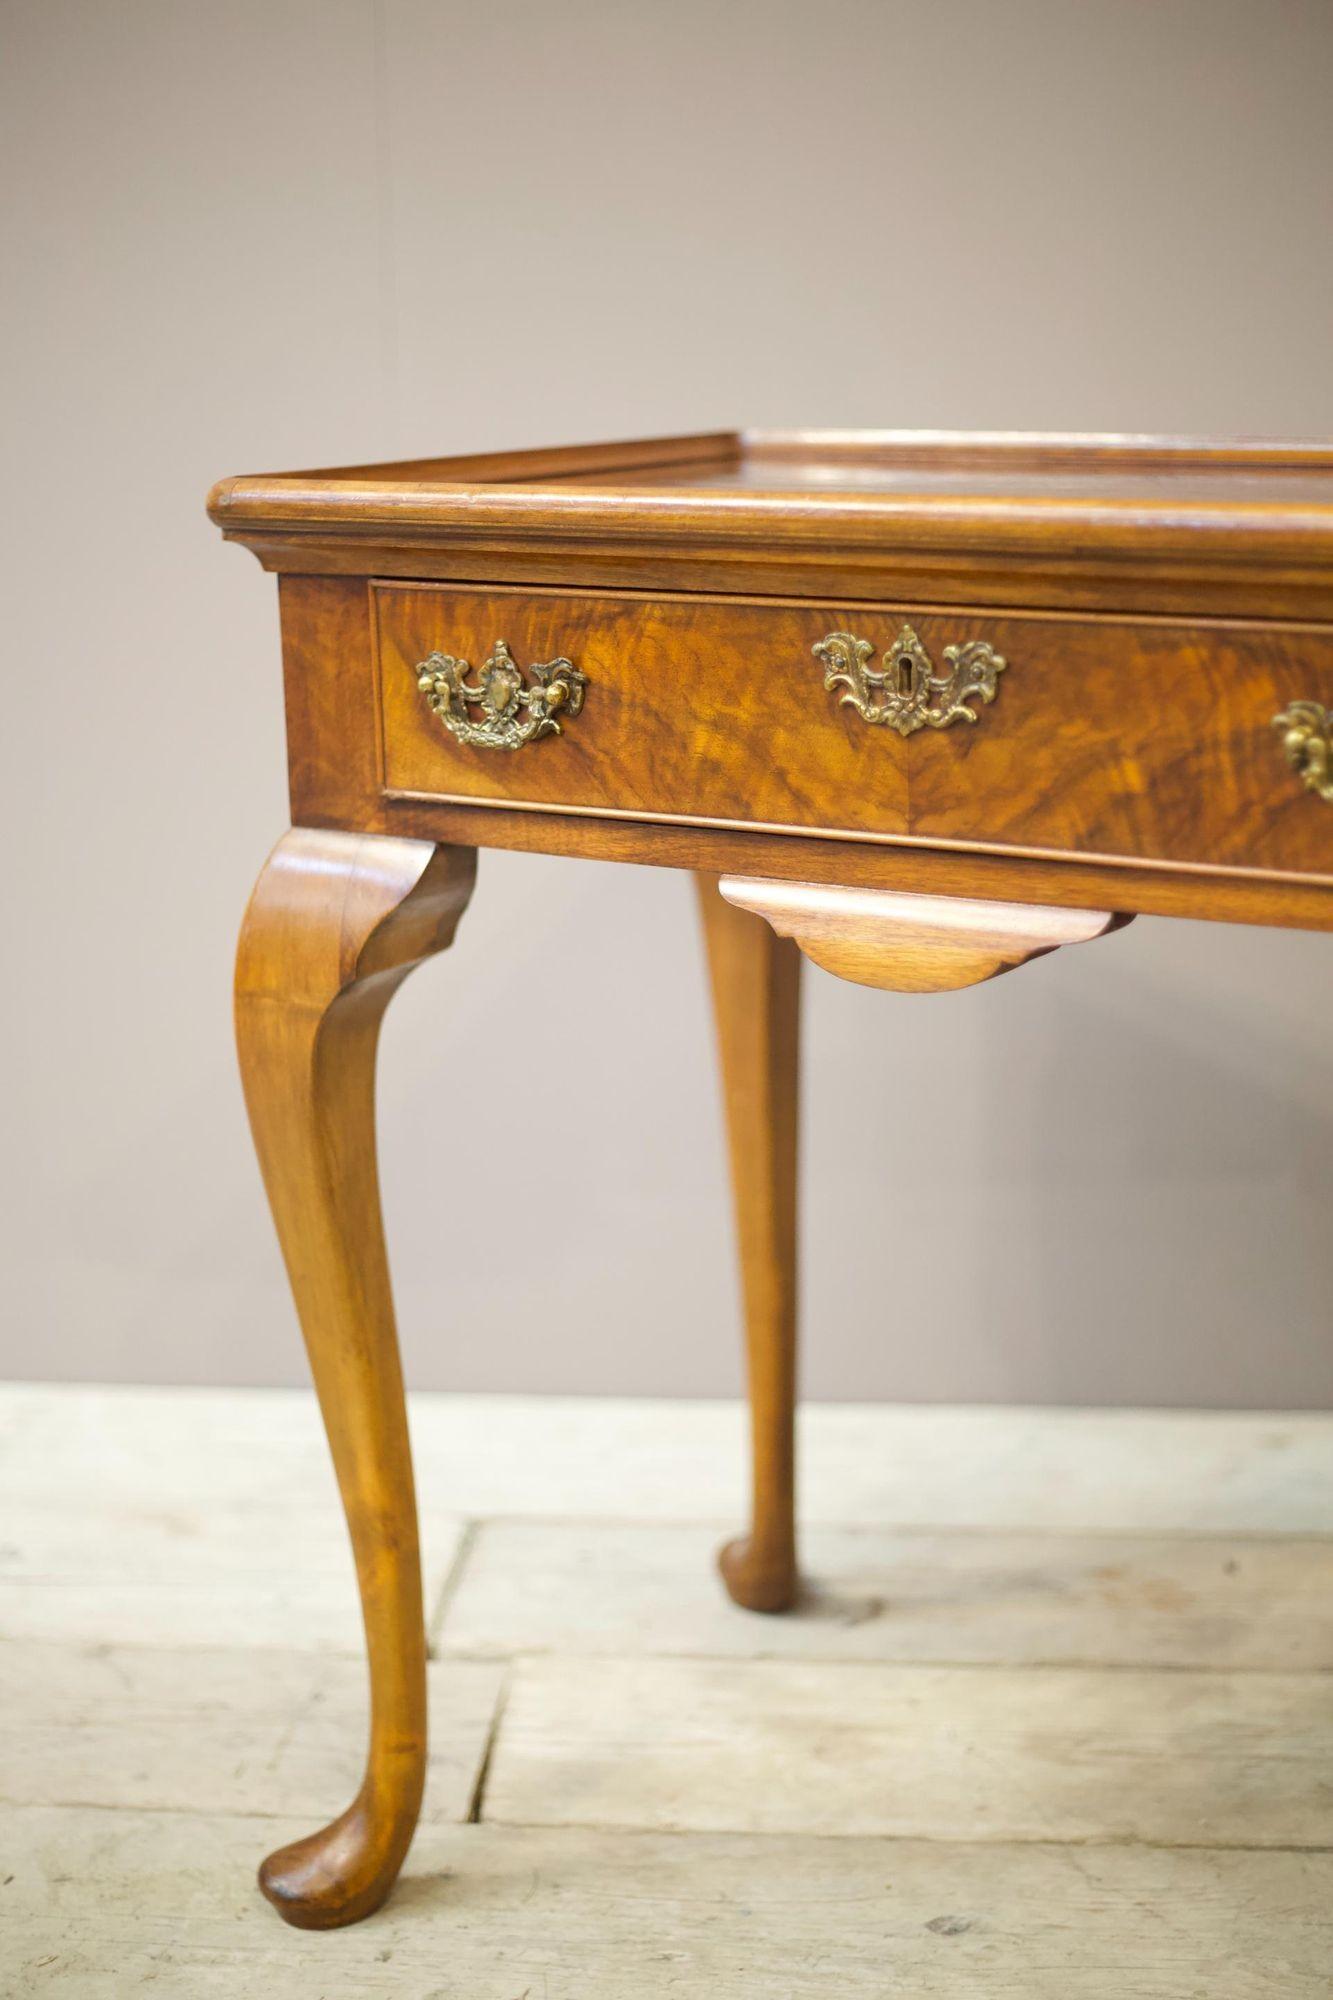 This is a very high quality mahogany low boy. The cabriole legs and lipped top are a stunning design that sets this apart from others I have had. The overall condition is very good with minor marks consistent with age and use. The drawer retains the